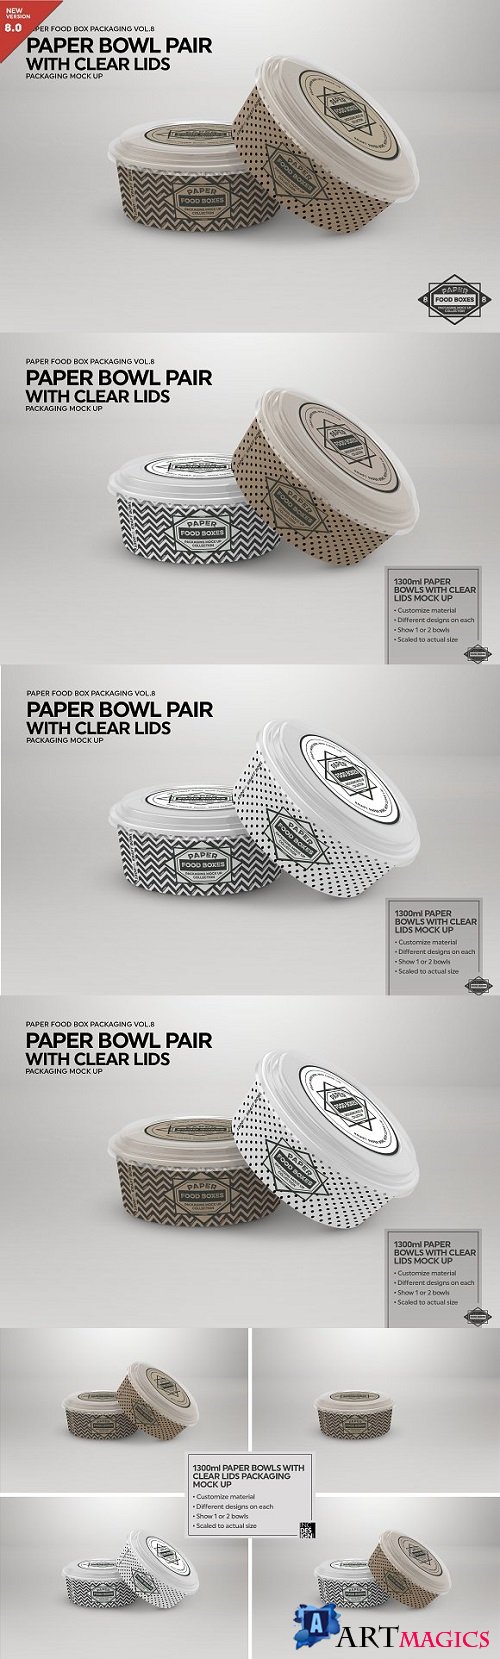 Paper Bowls with Clear Lids MockUp - 2181800